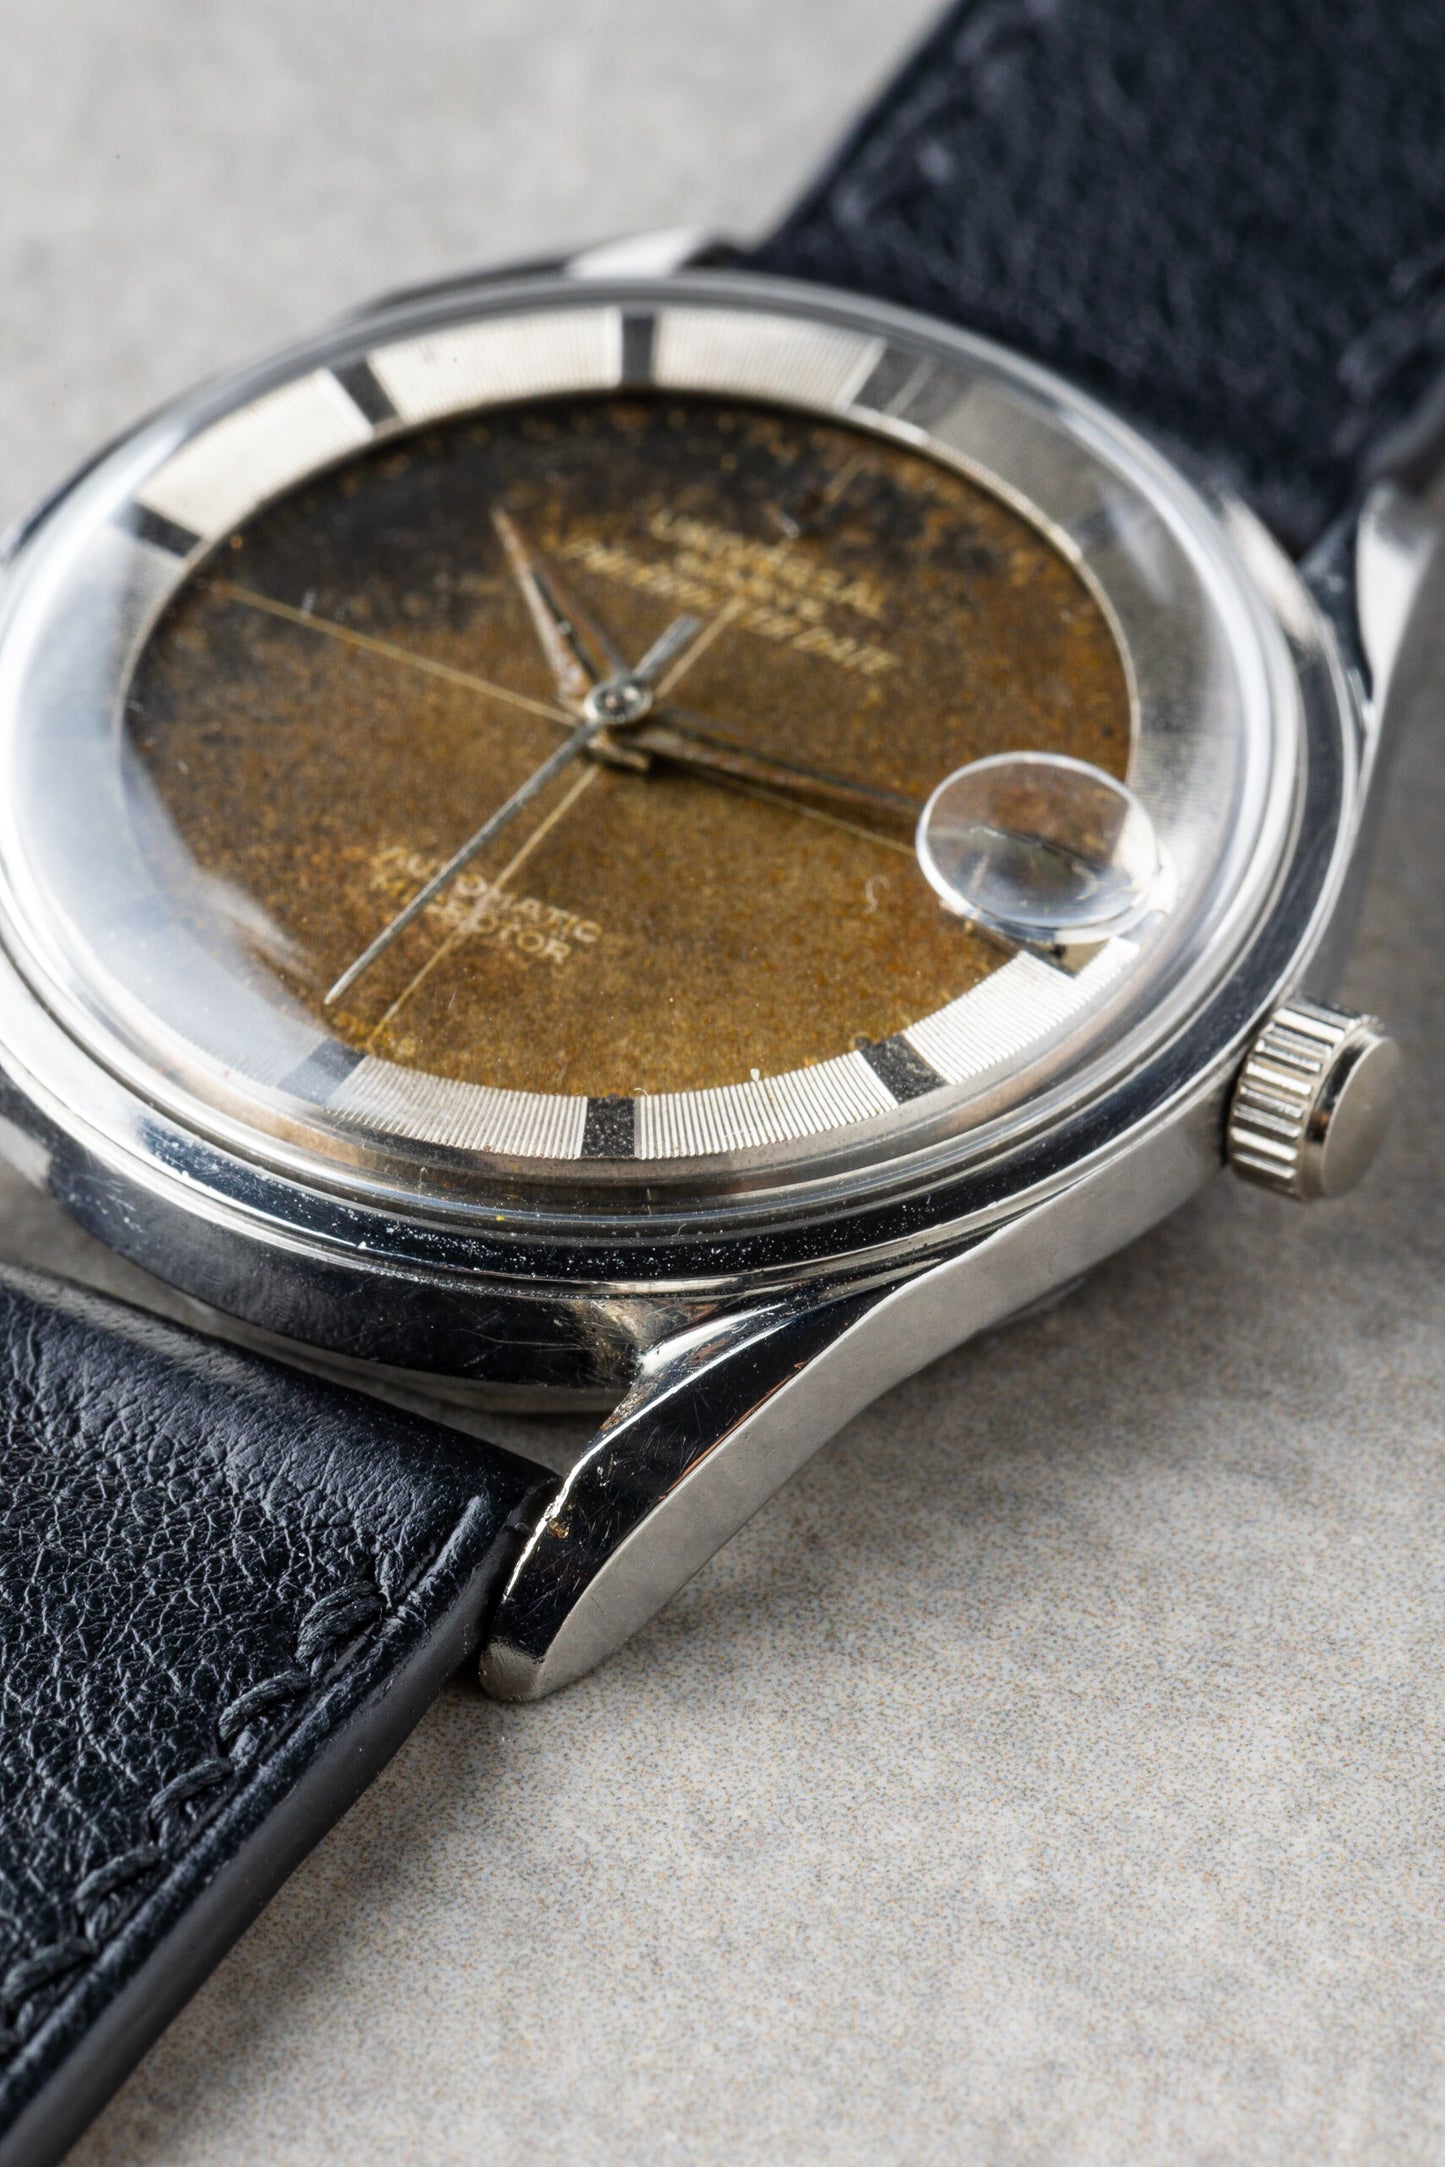 1959 "Tropical" Universal Genève Polerouter Date Automatic Microtor Ref. 204503/2BD